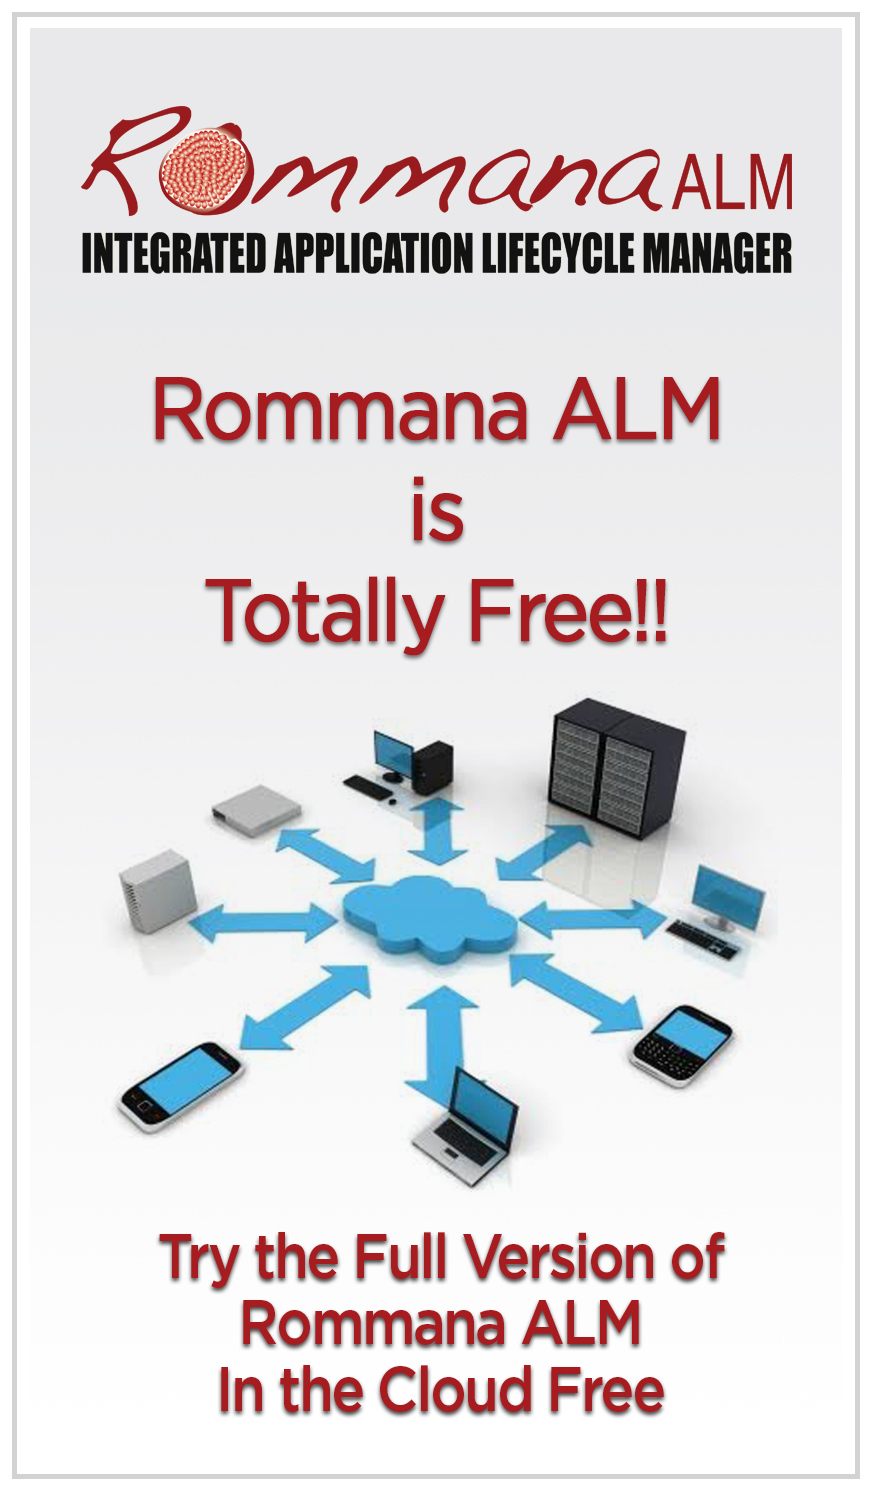 Use the Full Version of Rommana ALM in the Cloud for Free